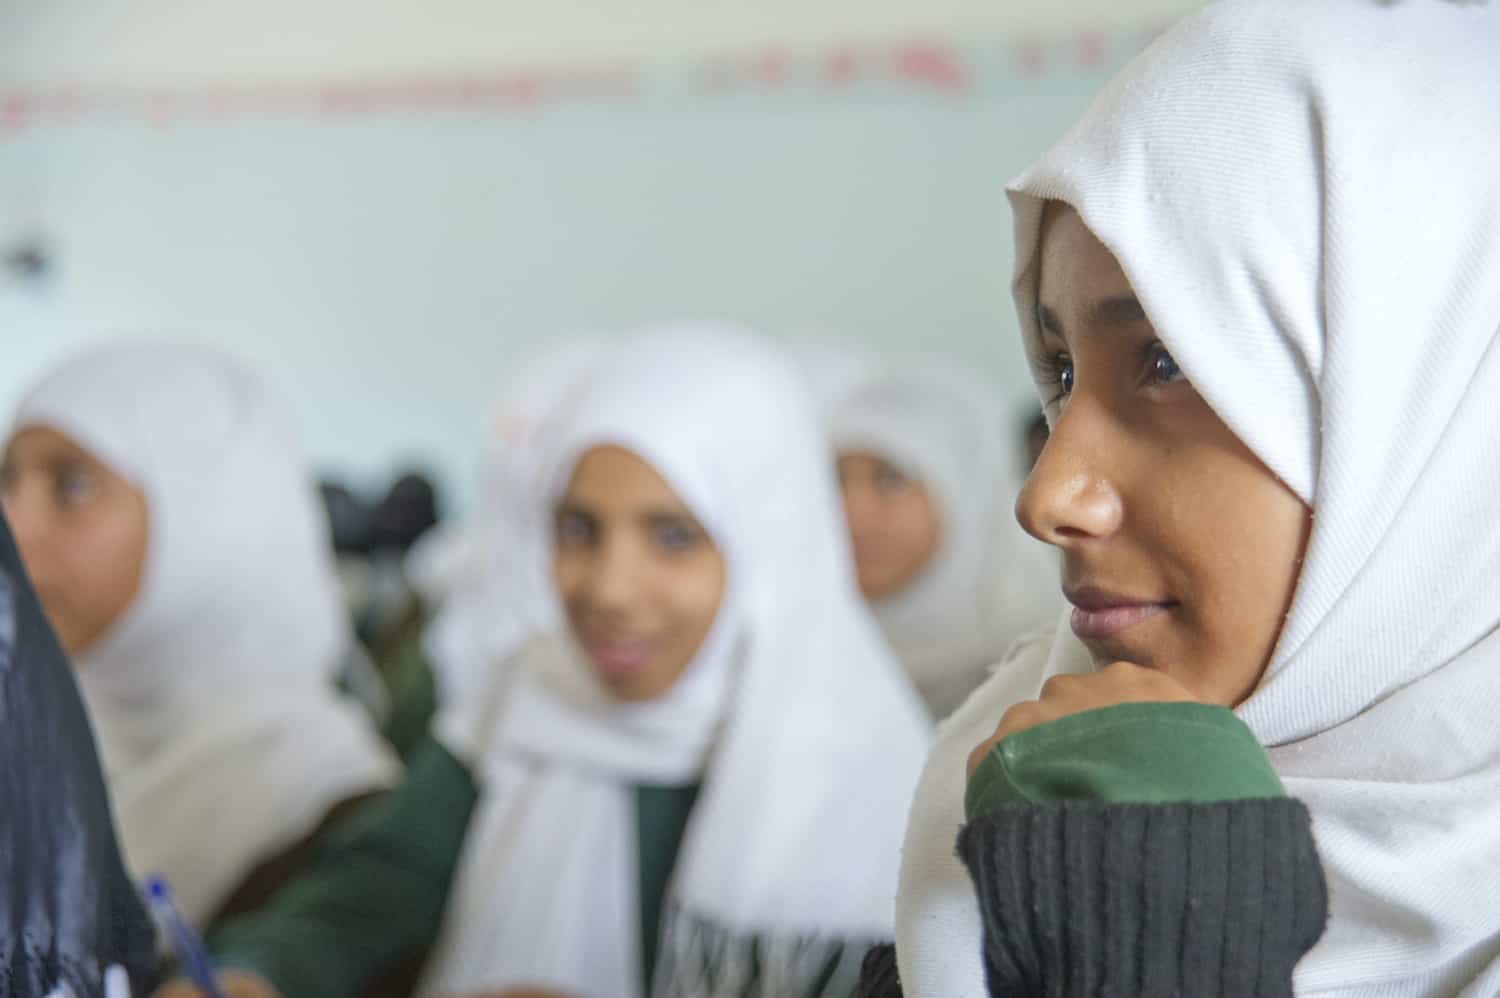 A girl in Yemen wearing a head scarf sits in class, smiling and looking attentive.